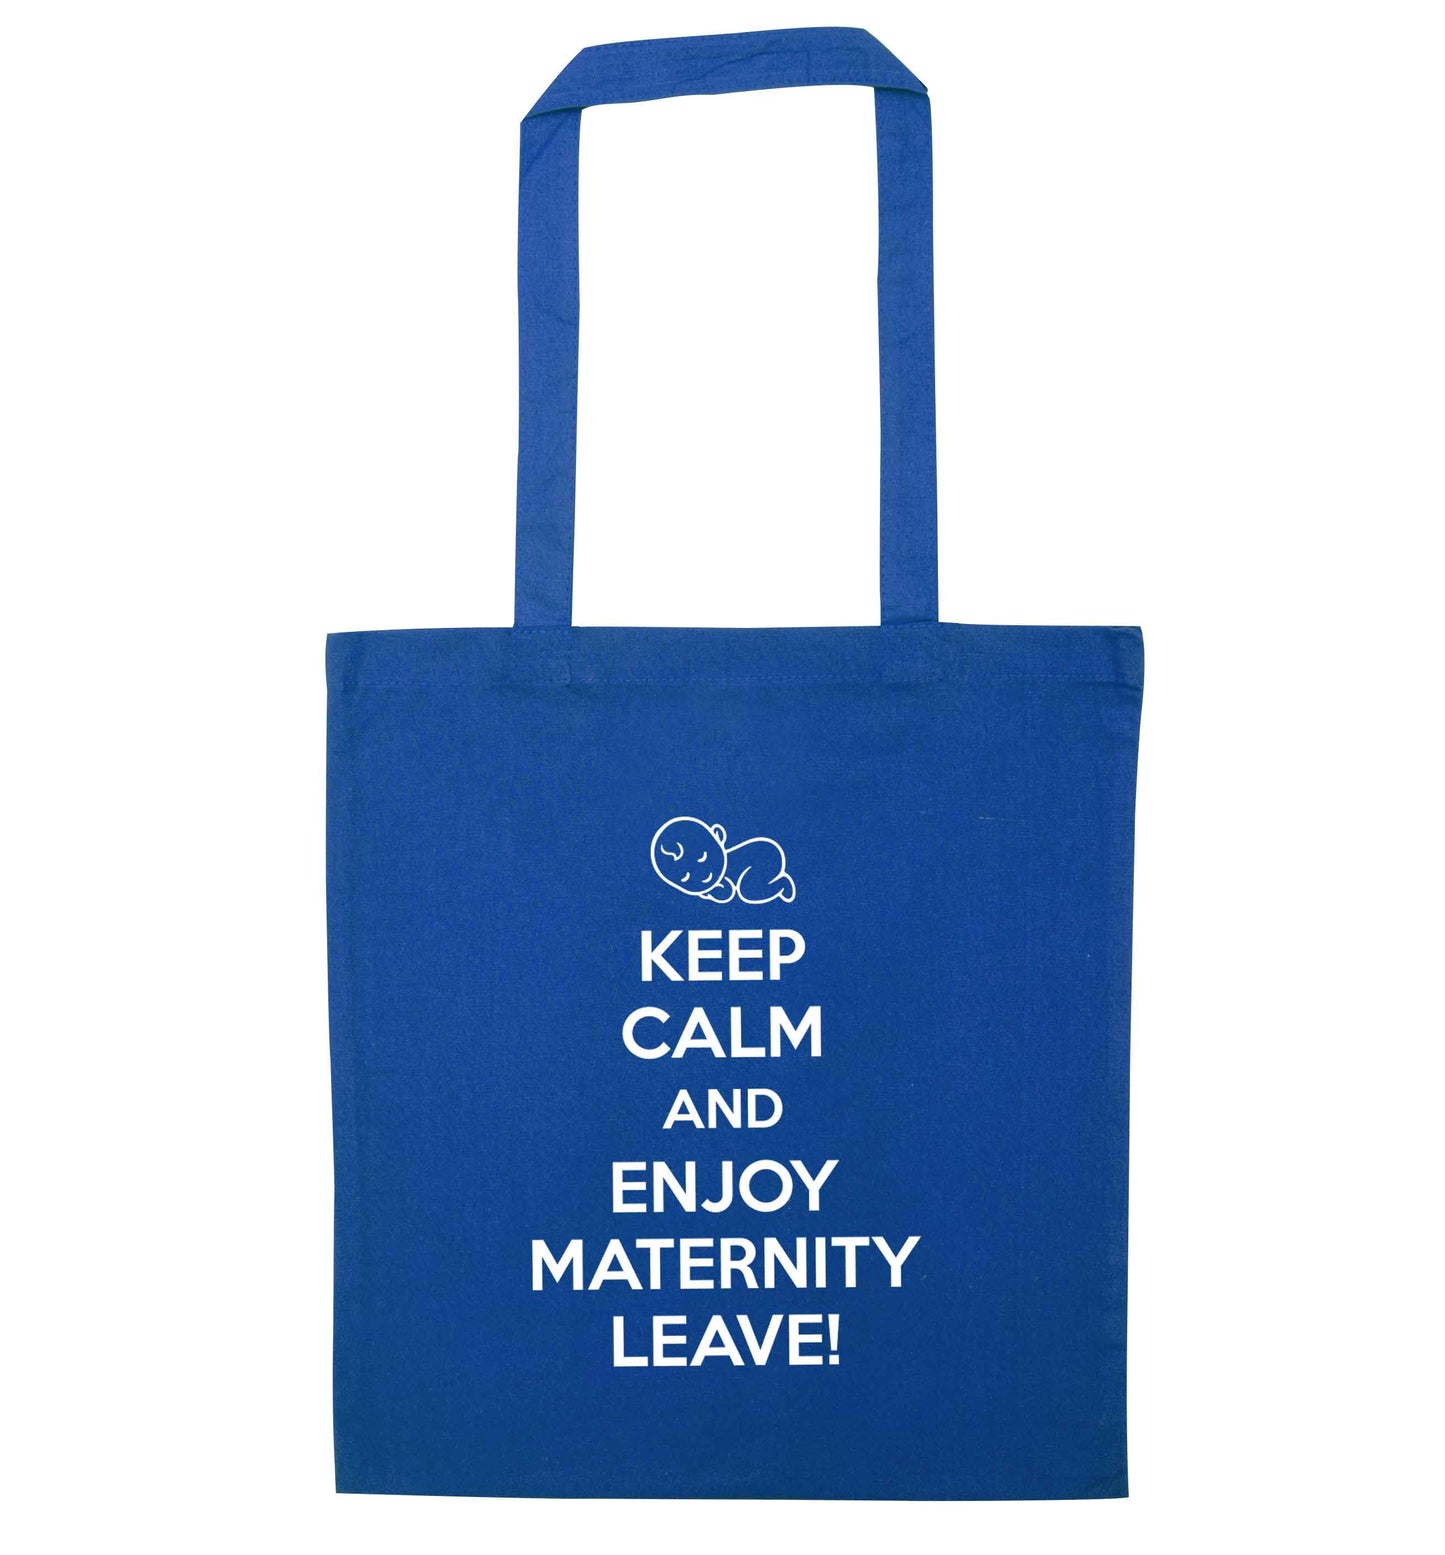 Keep calm and enjoy maternity leave blue tote bag